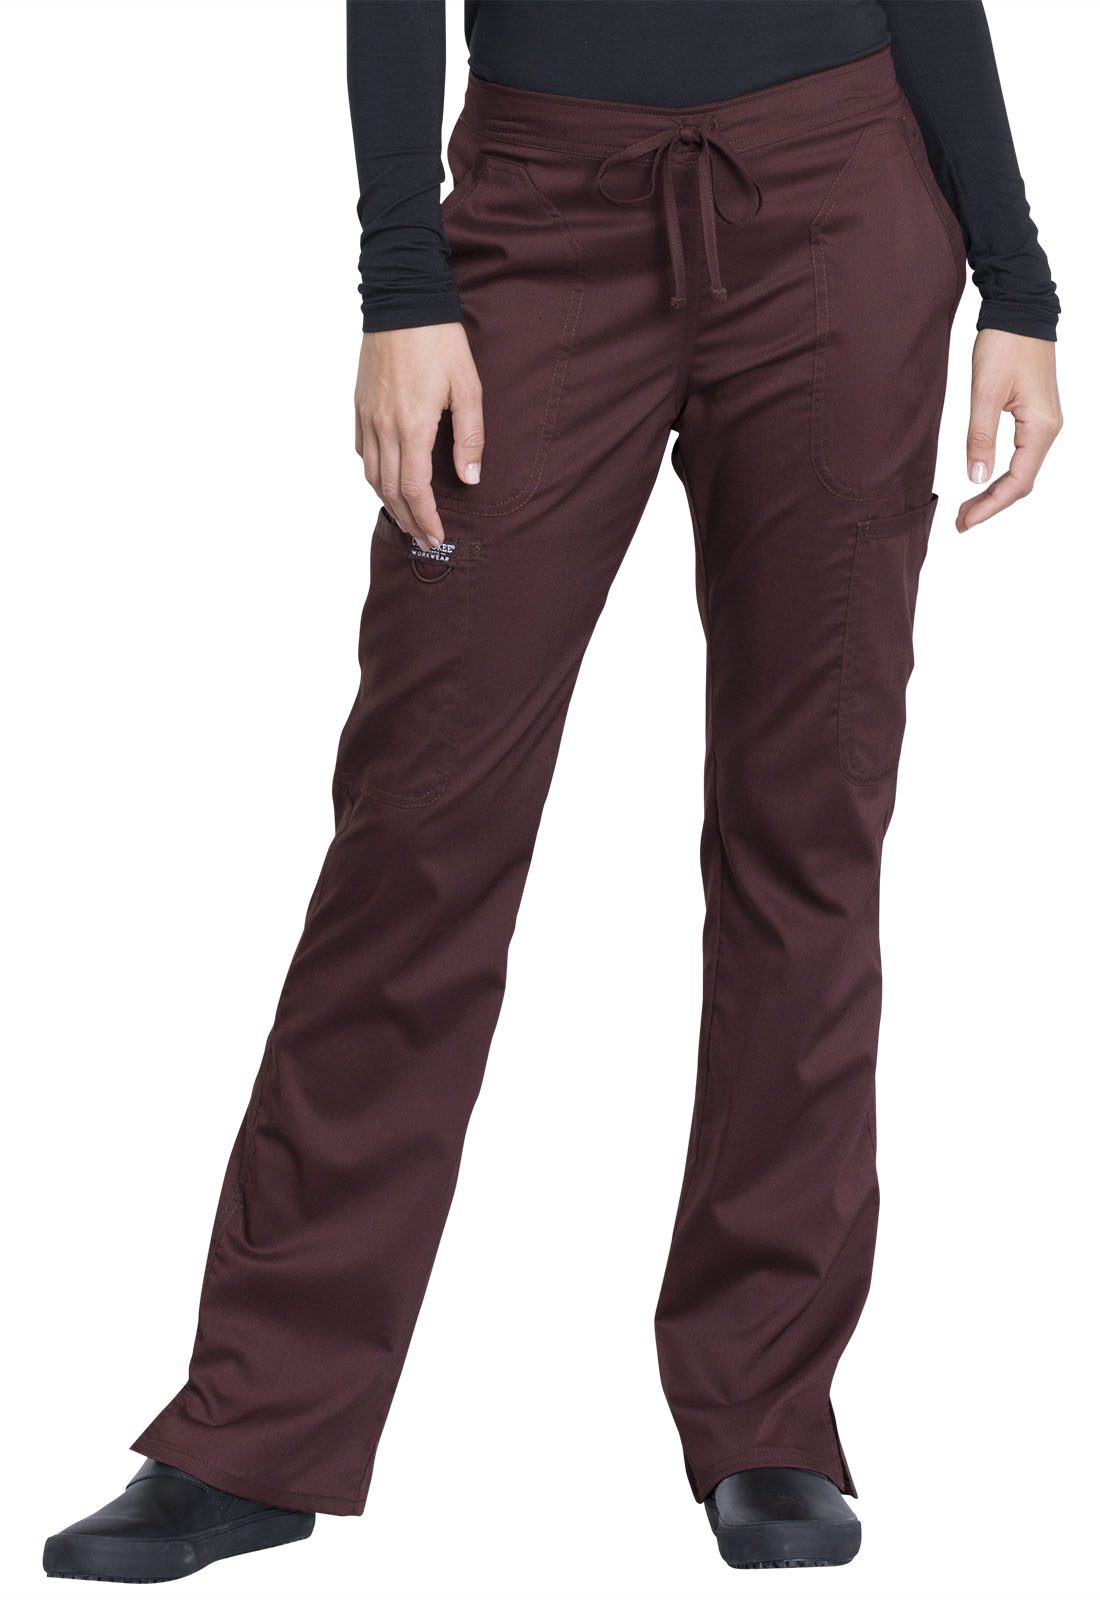 Mid Rise Moderate Flare Drawstring Pant in Tall